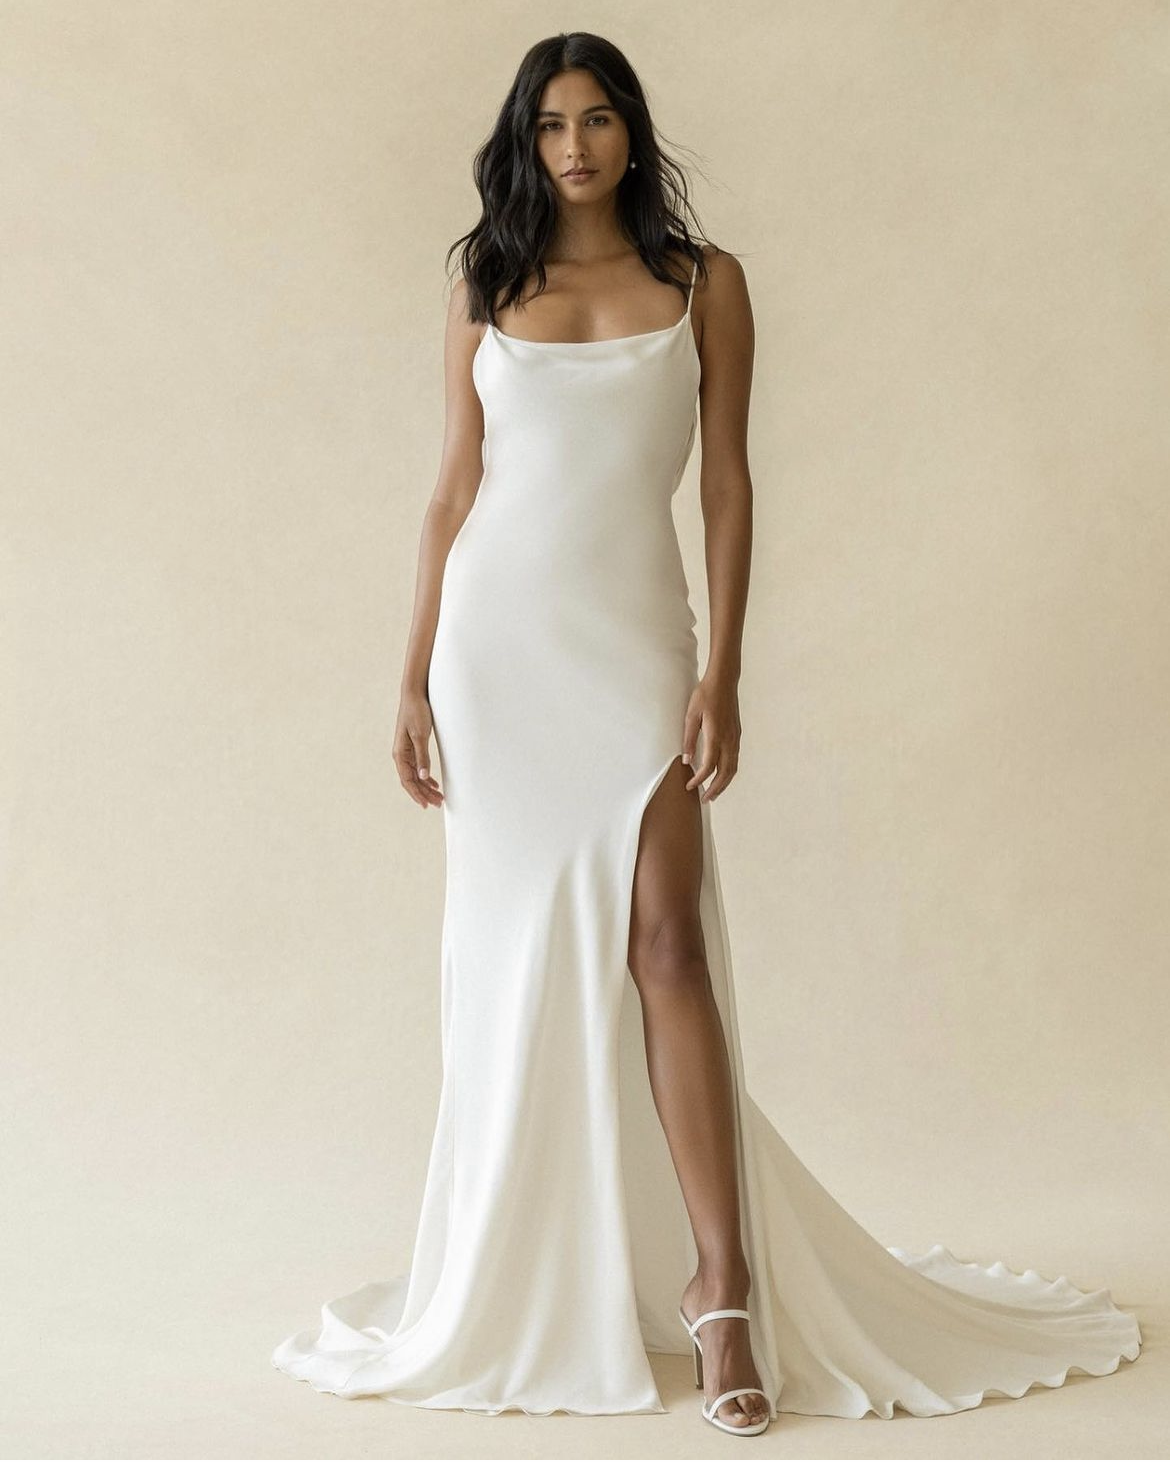 Byrdie Gown - SAMPLE - Size 8 and 10 available - Clothing